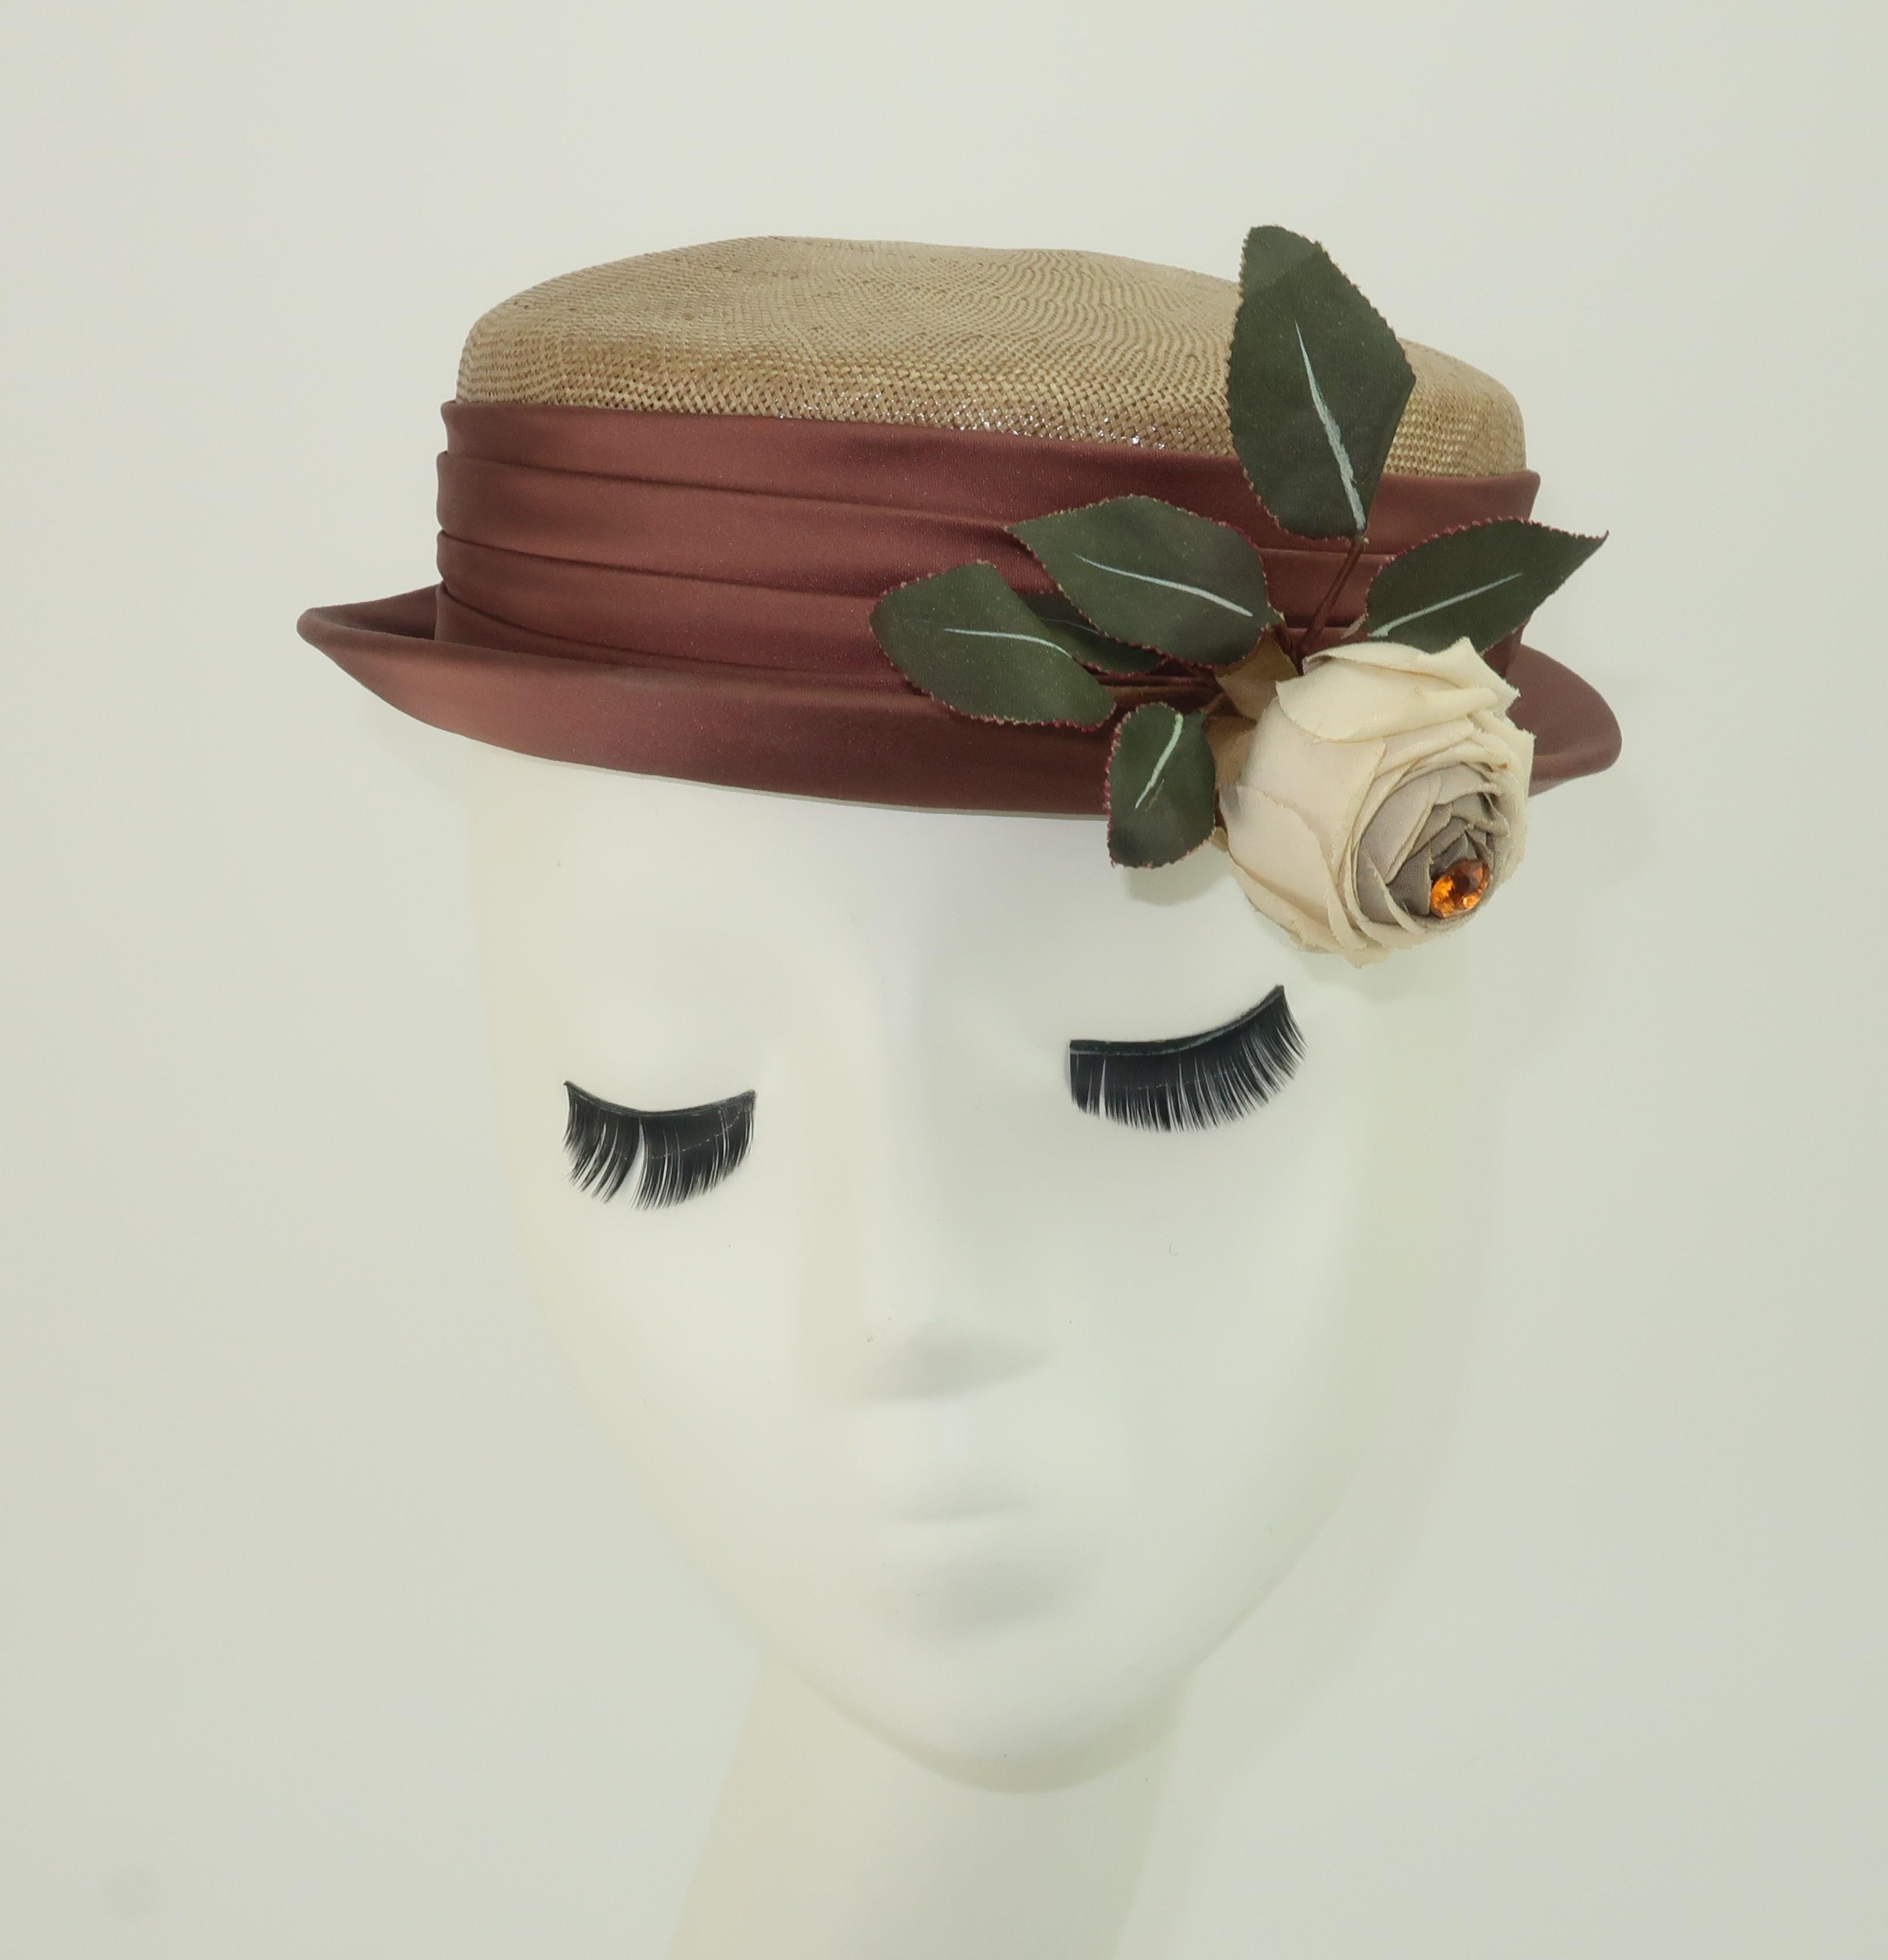 Charming 1940's straw hat in a light tan or fawn shade with taupe brown ruched satin band and a natural white silk rose embellished with an amber stone.  The hat silhouette is somewhere between a modified boater and a pork pie style.  It is adorable